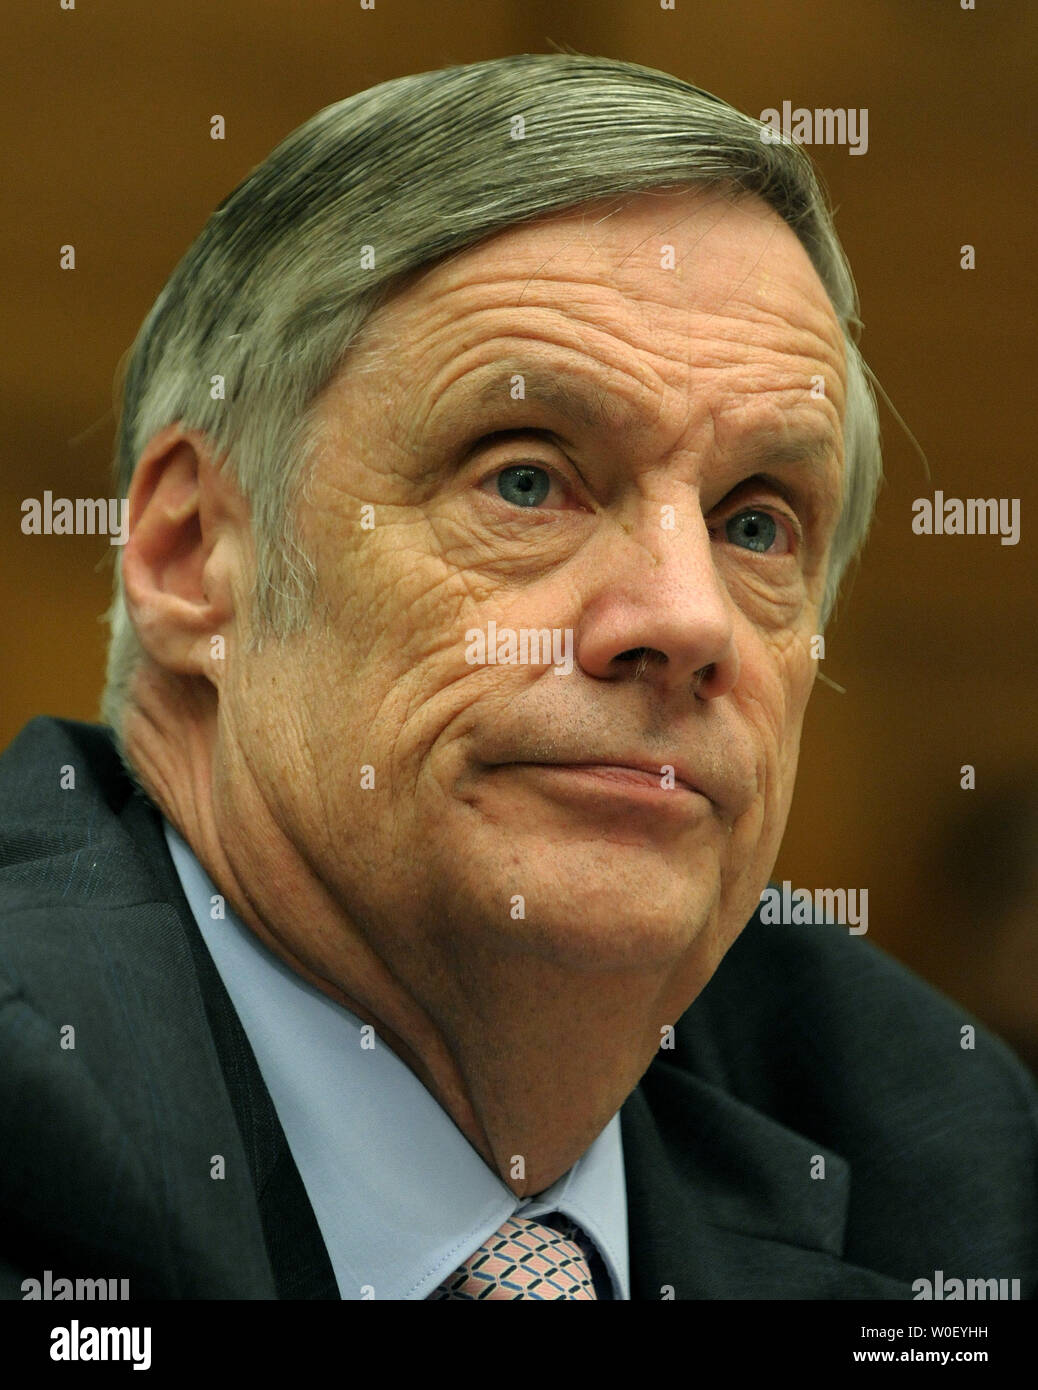 Robert F. Hale, comptroller and Chief Financial Officer of the U.S. Department of Defense testifies before the House Armed Services Committee regarding the Defense Department's fiscal year 2010 budget on Capitol Hill in Washington on May 13, 2009.    (UPI Photo/Roger L. Wollenberg) Stock Photo